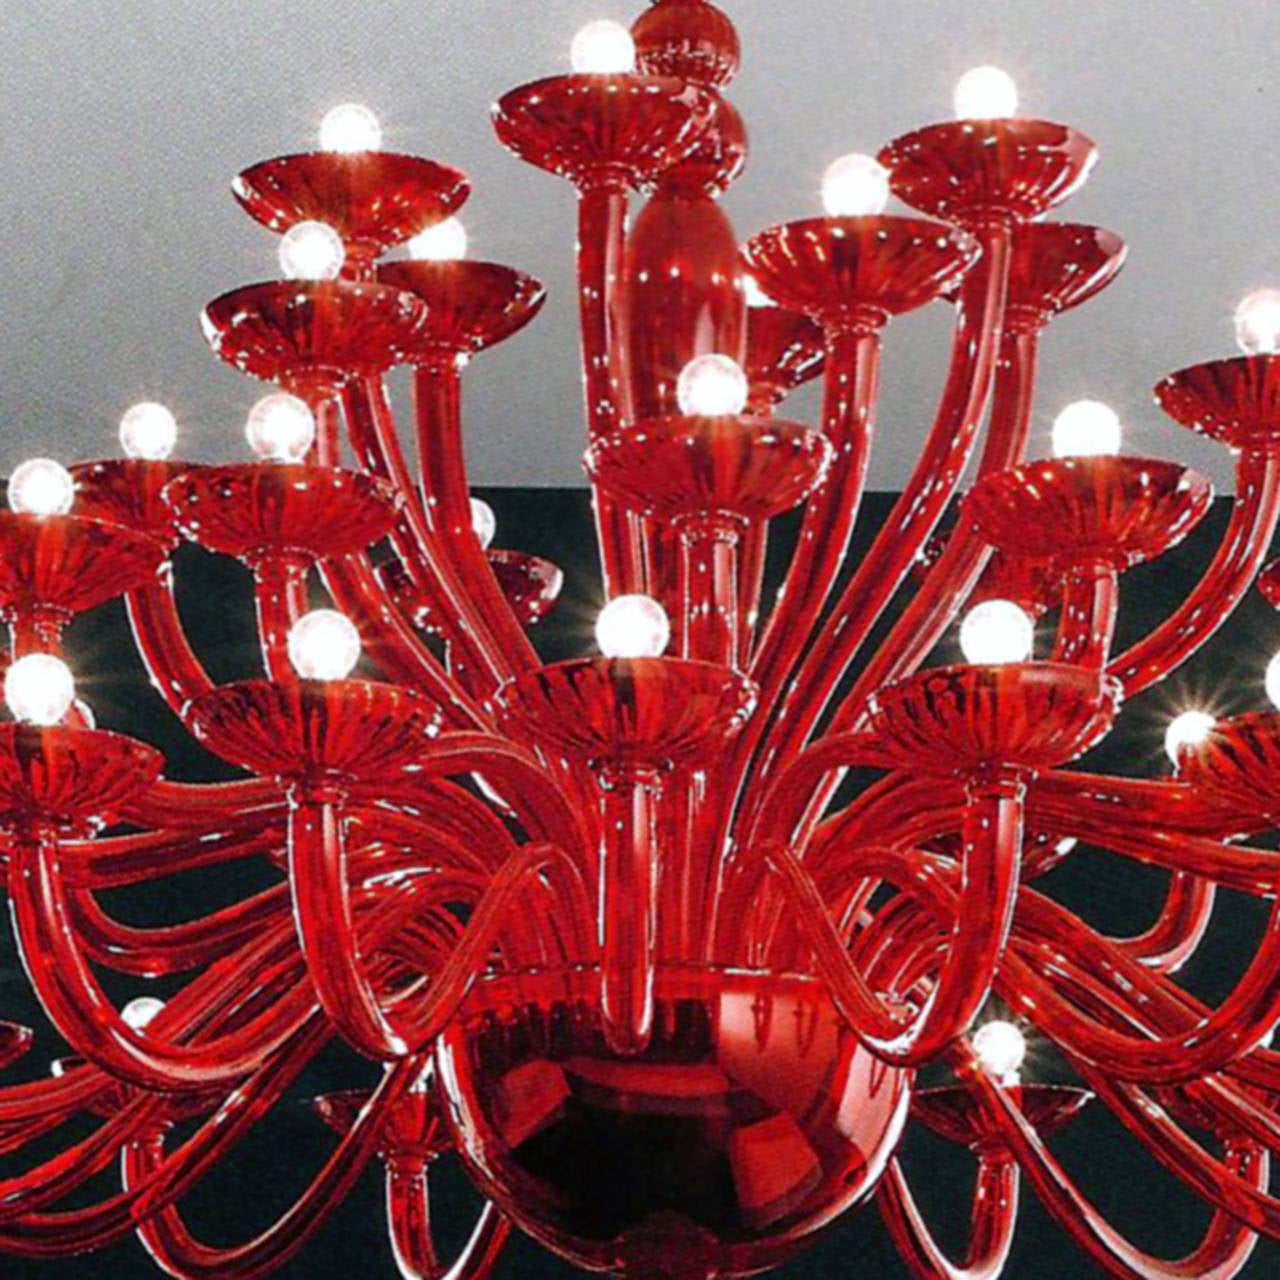 2 elegant and stunning large Venetian chandeliers or pendants in red glass in the modern neoclassical spirit, each having four tiers with 18 arms on the lower level, 12 arms on the second tier and six arms on each the third and fourth